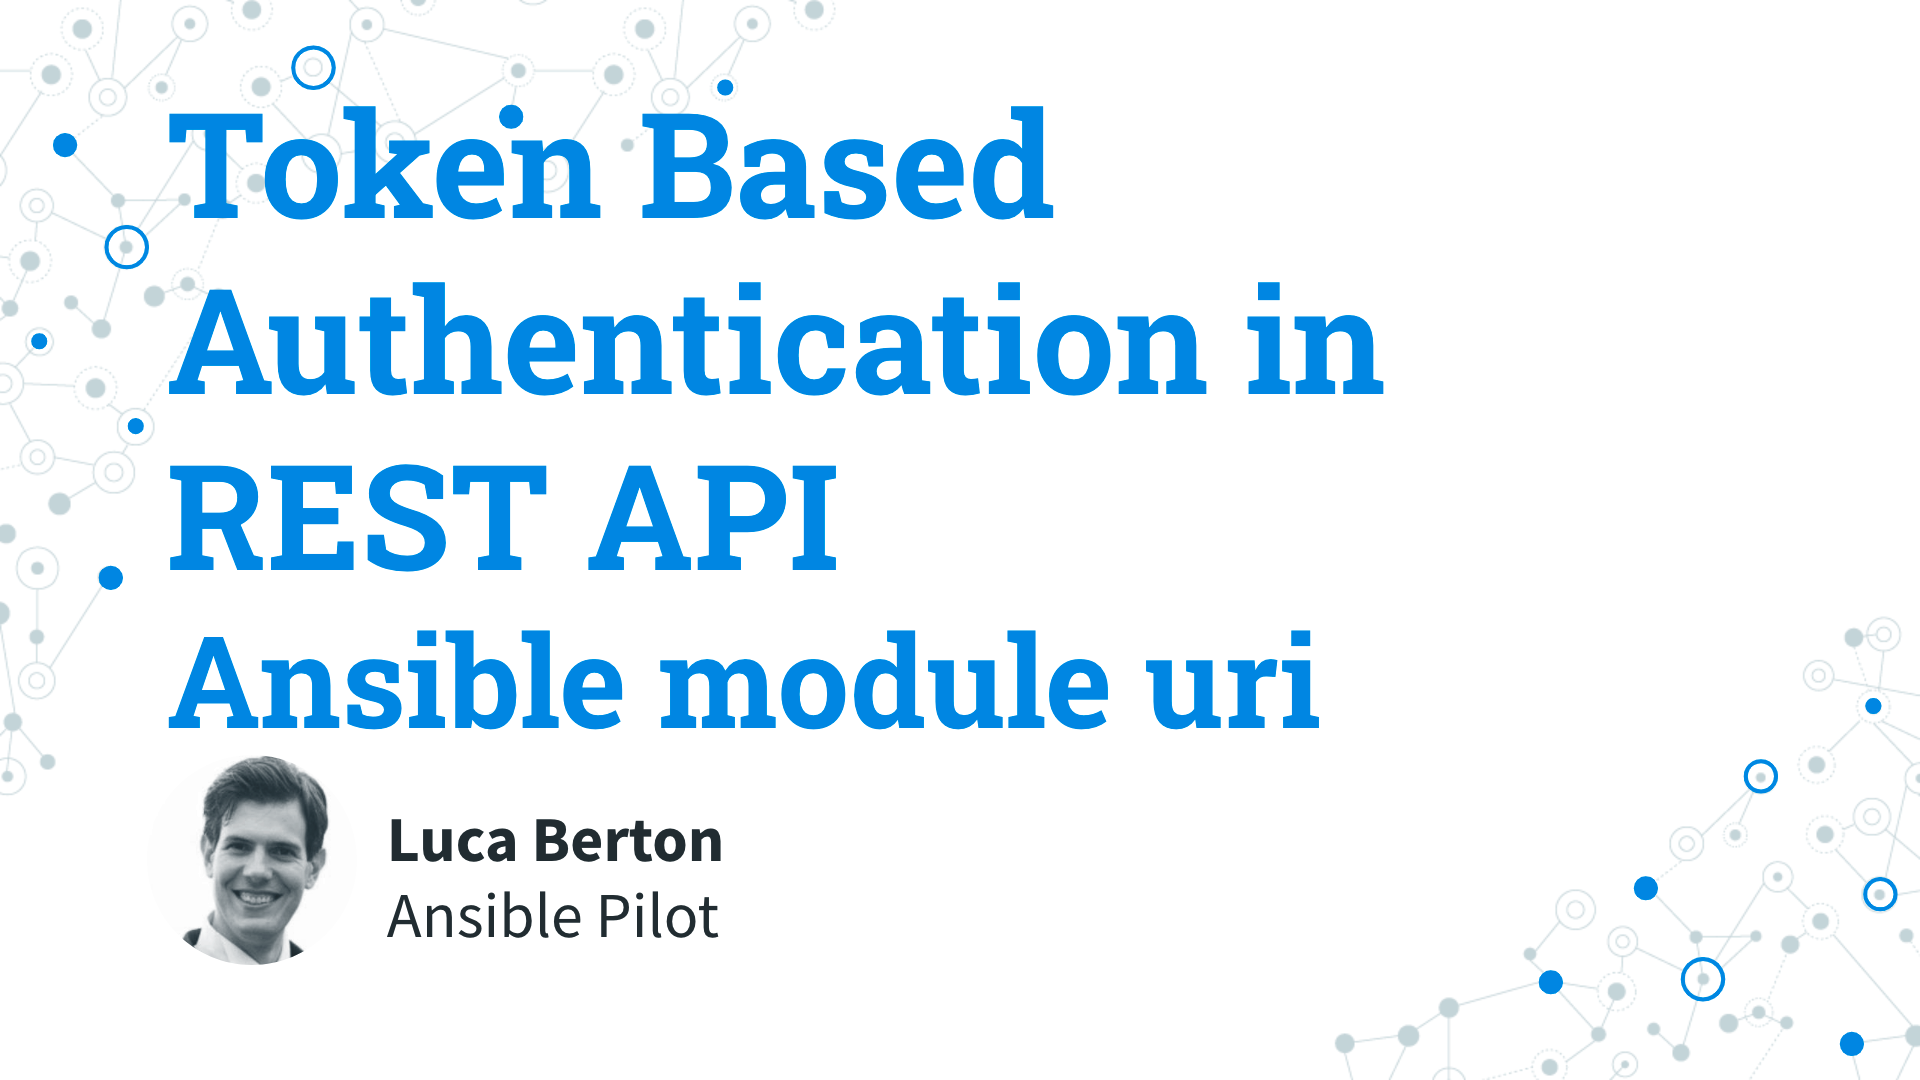 Token Based Authentication in REST API - Interact with webservice - Ansible module uri - Authentication request using the REST API token 